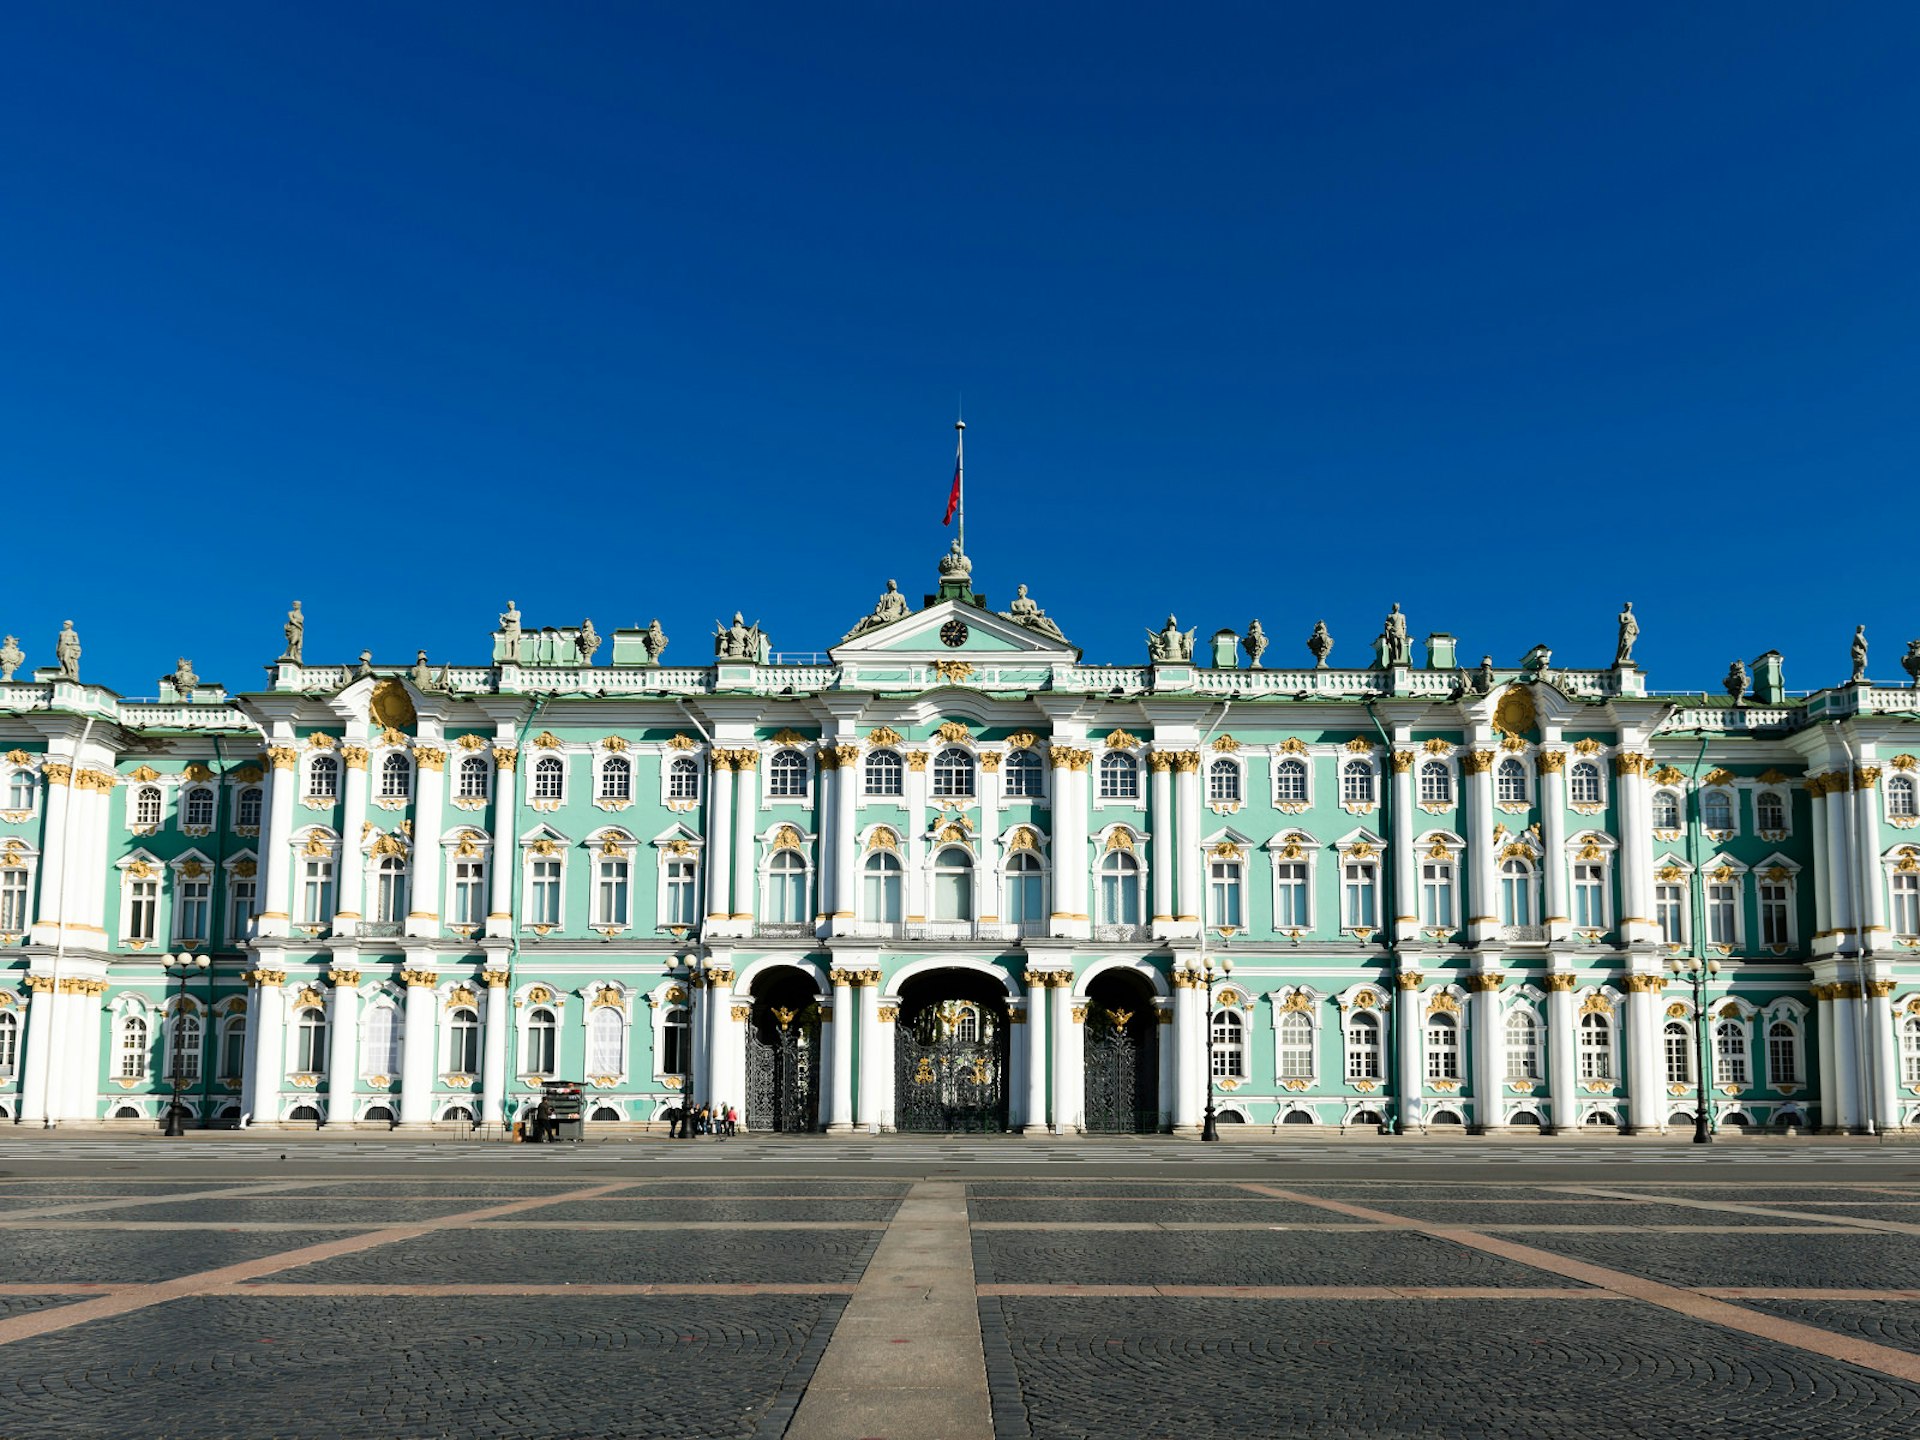 The spectacular Winter Palace, home of the State Hermitage Museum © Valeri Potapova / Shutterstock